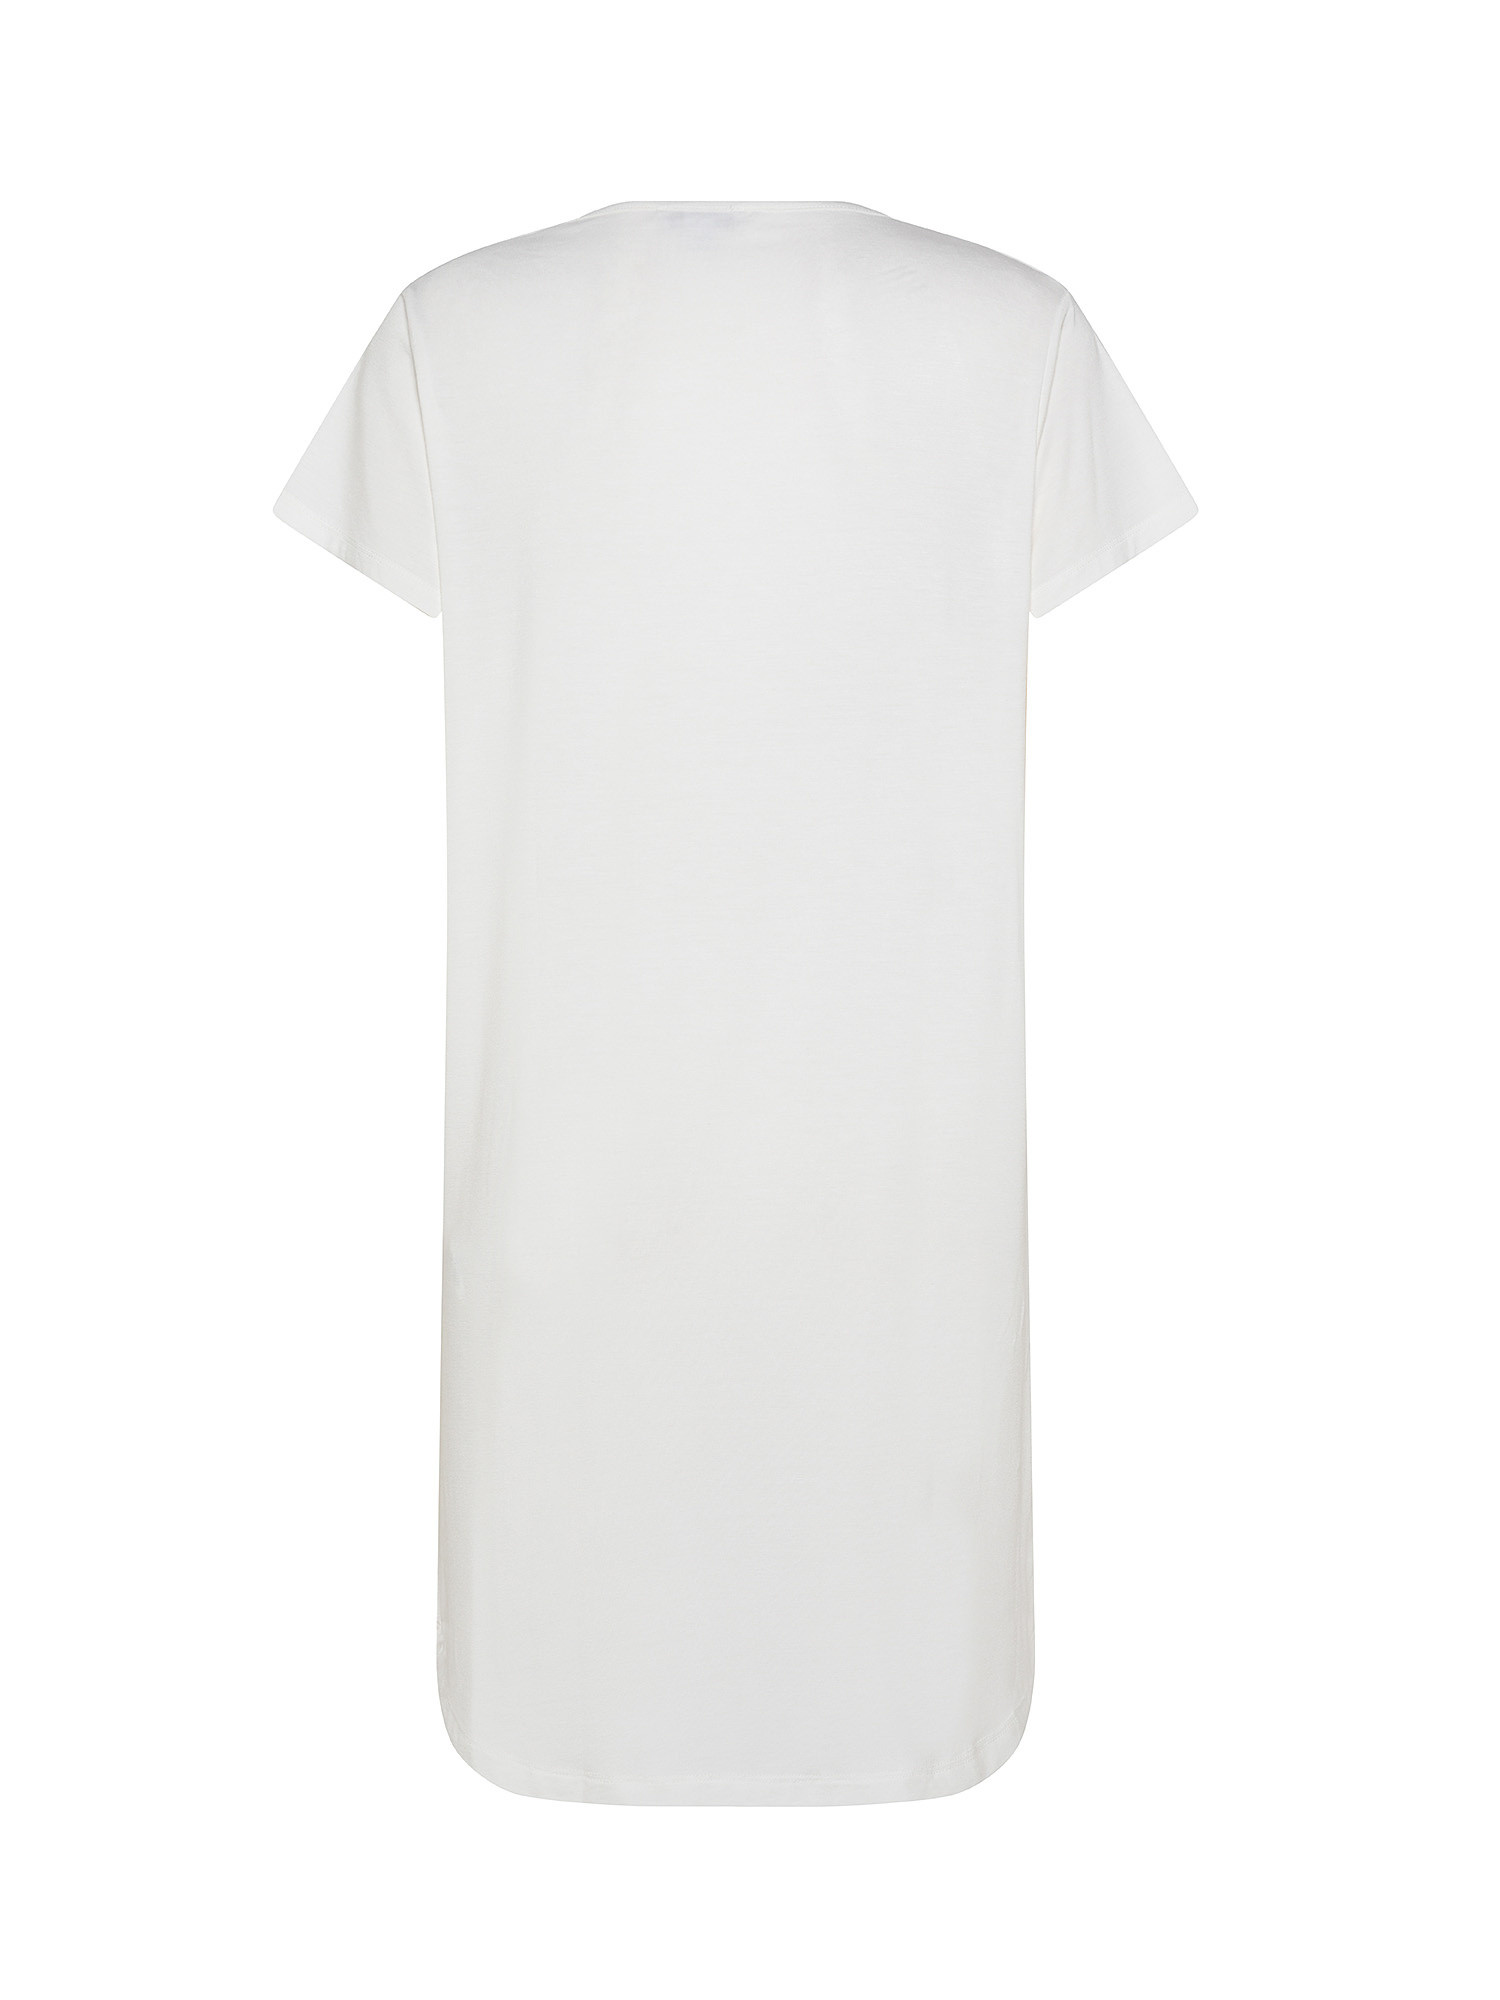 Solid color bamboo viscose maxi t-shirt, White, large image number 1